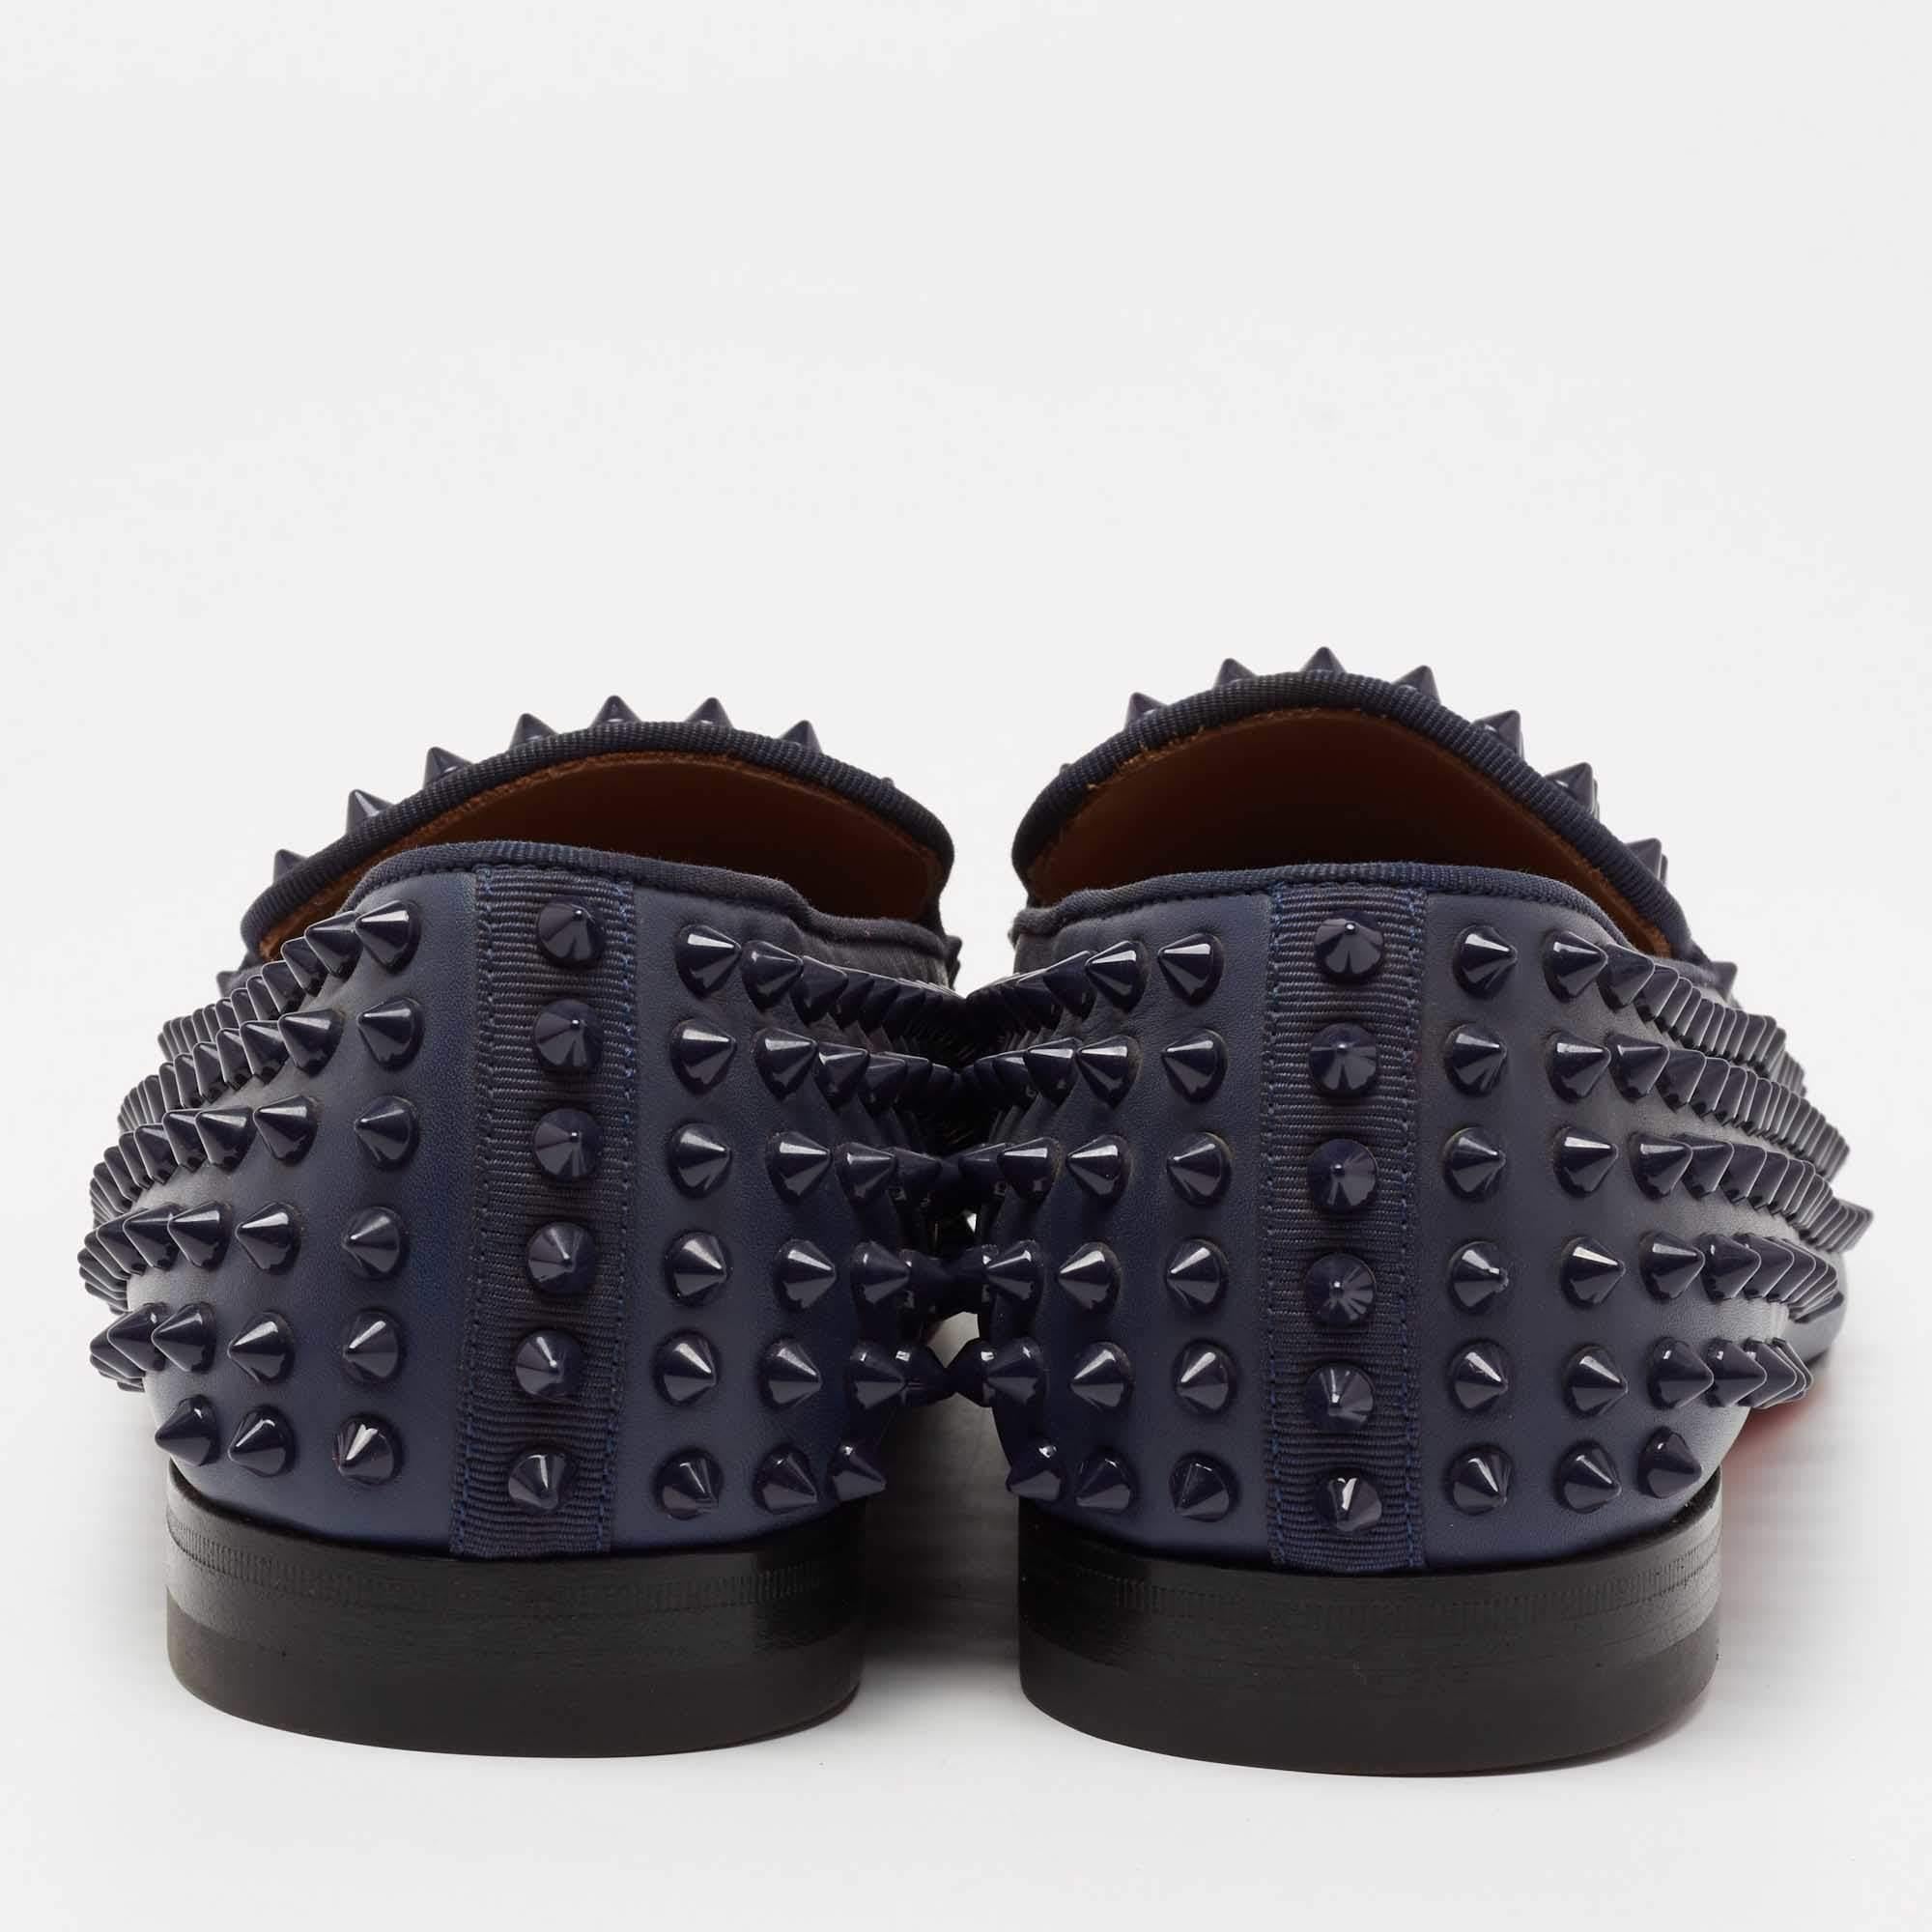 Black Christian Louboutin Navy Blue Leather Dandelion Spike Smoking Slippers Size 40 For Sale